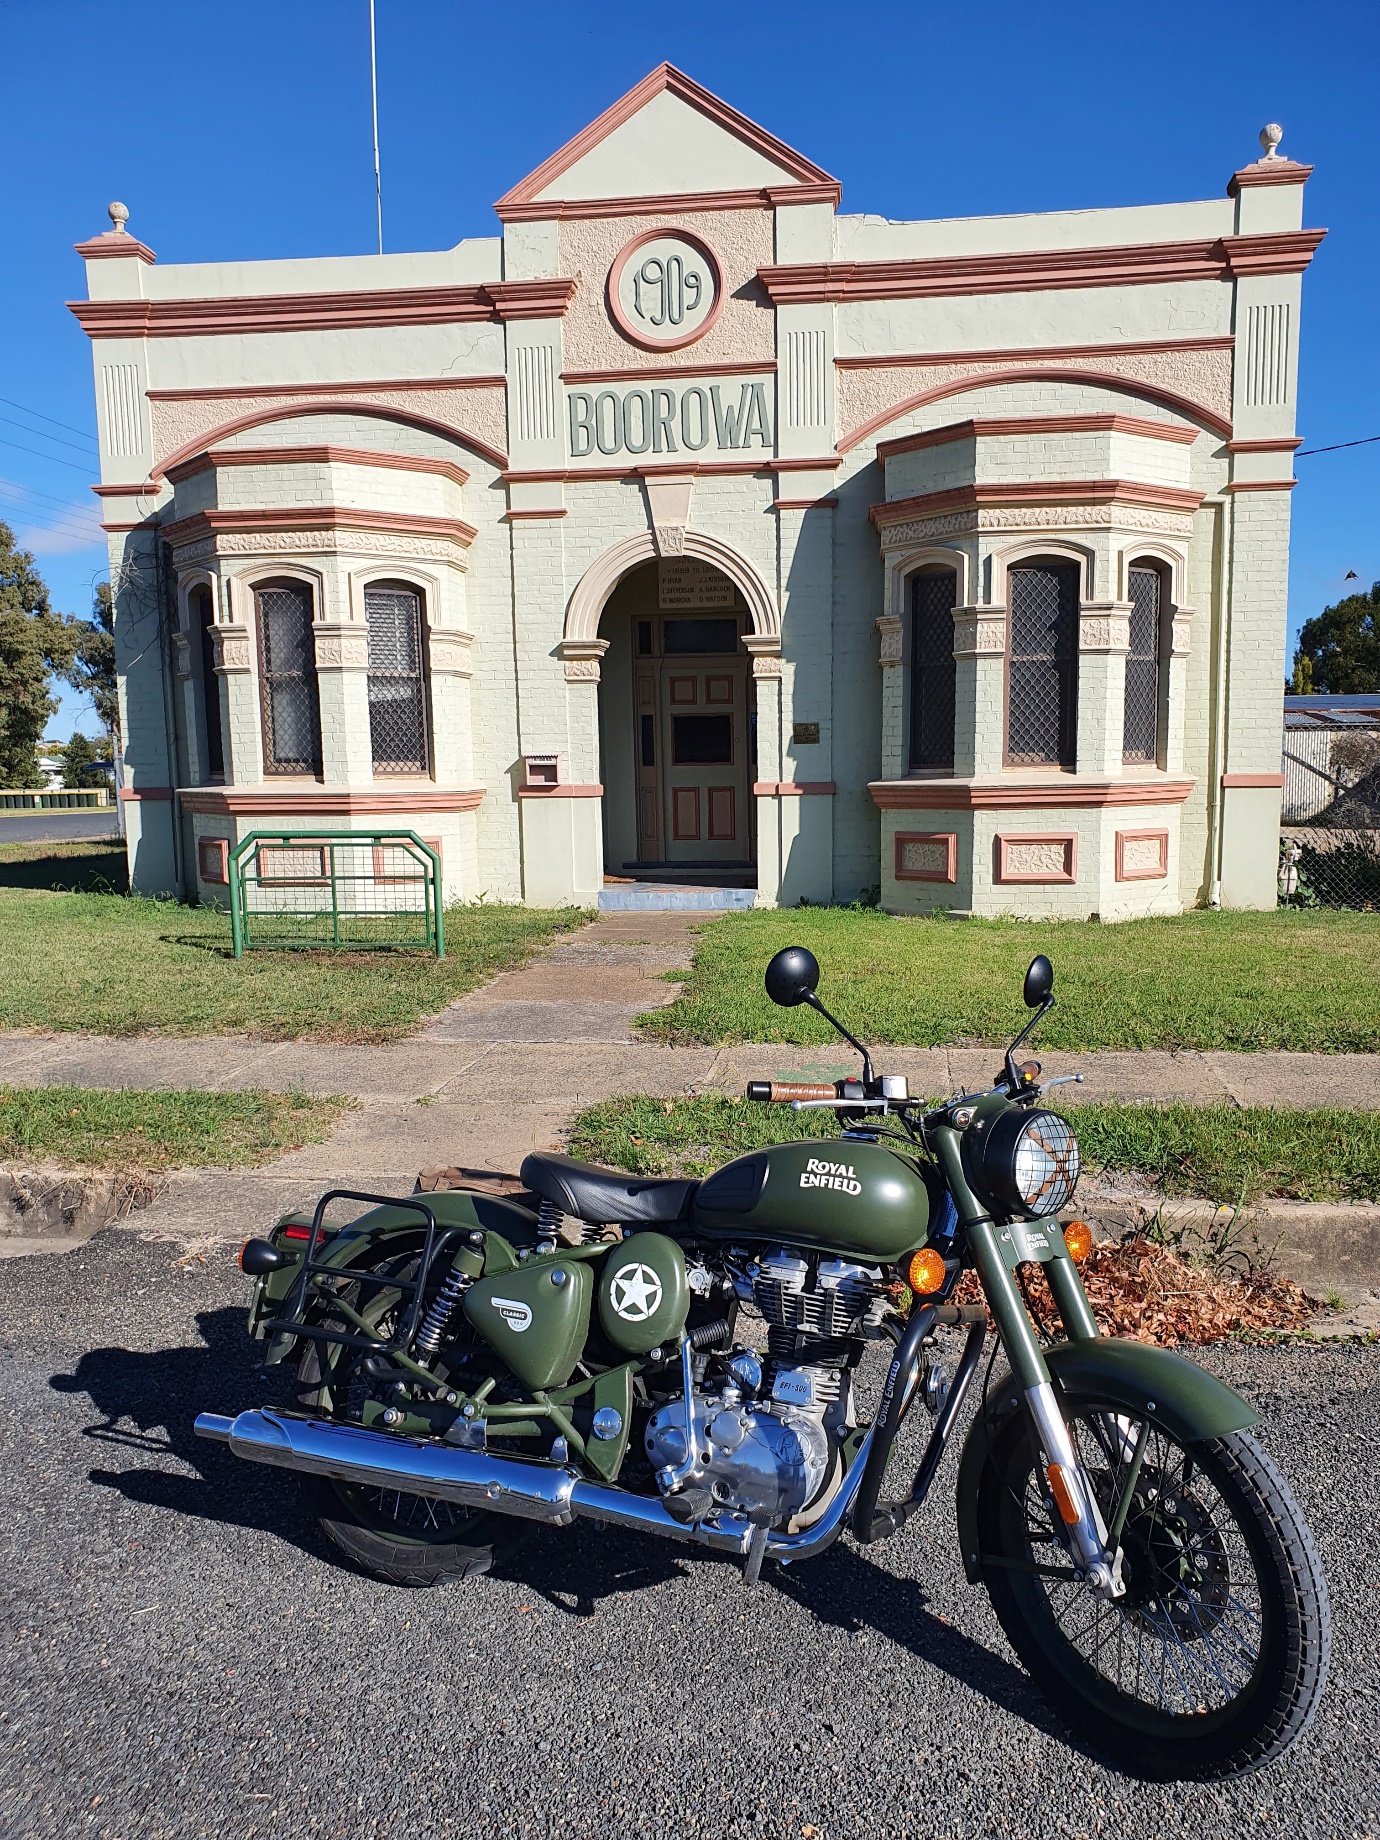 A motorcycle parked in front of a building

Description automatically generated with medium confidence